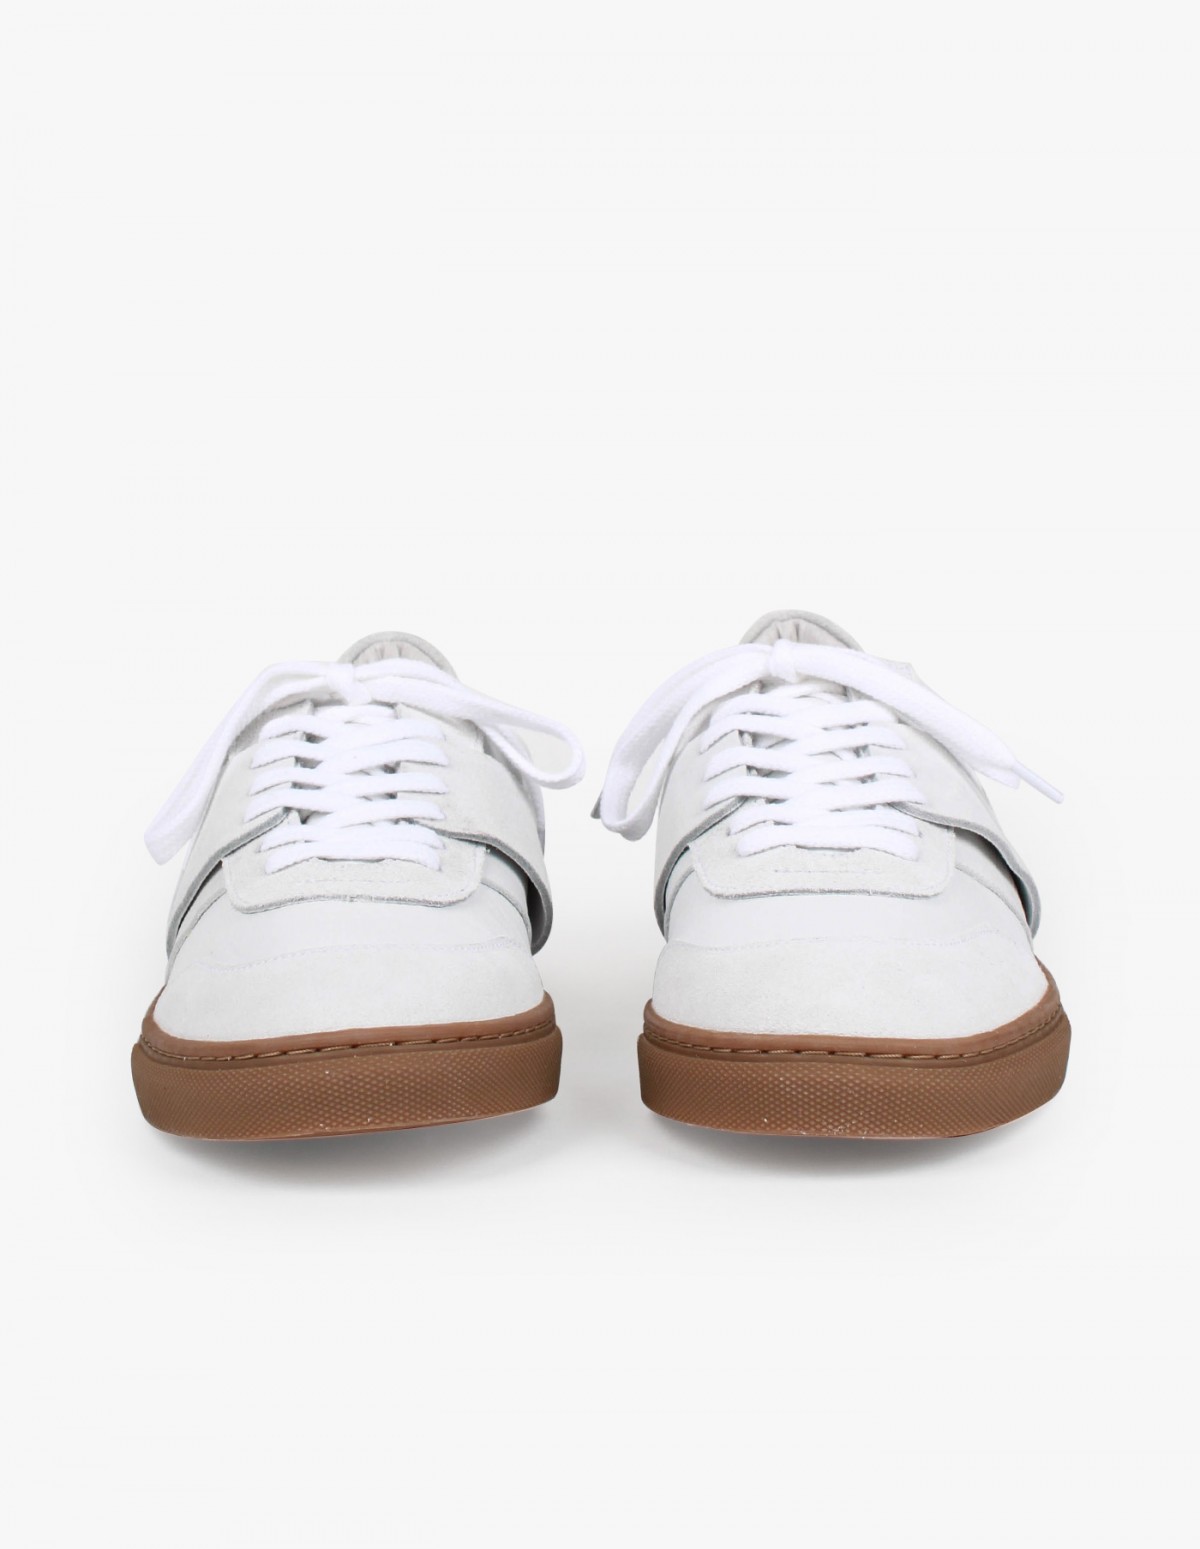 Won Hundred Renee in White Leather/Suede